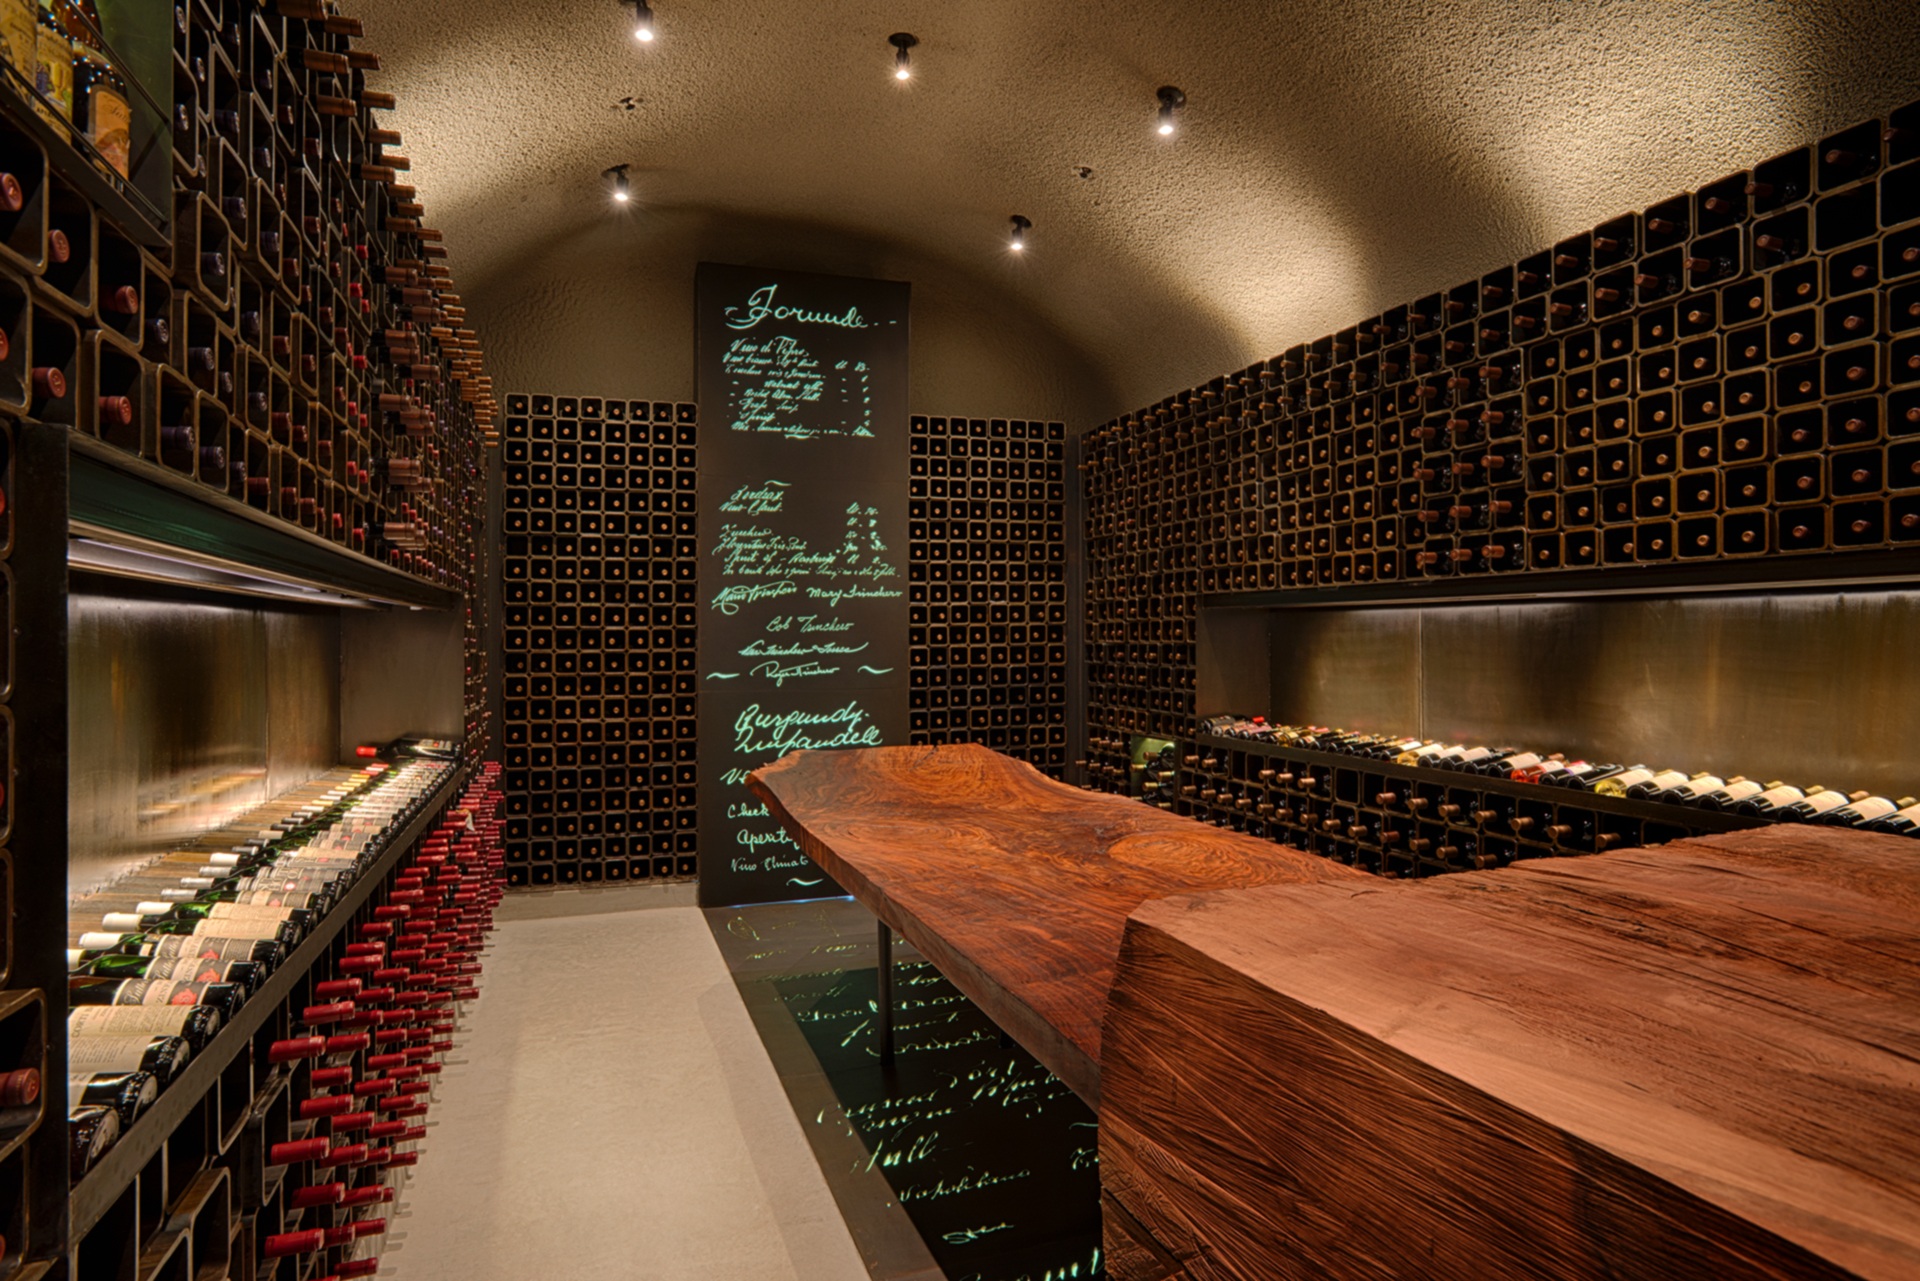 Trinchero Estate Tasting Room interior renovation and remodel completed by FDC in Sonoma County